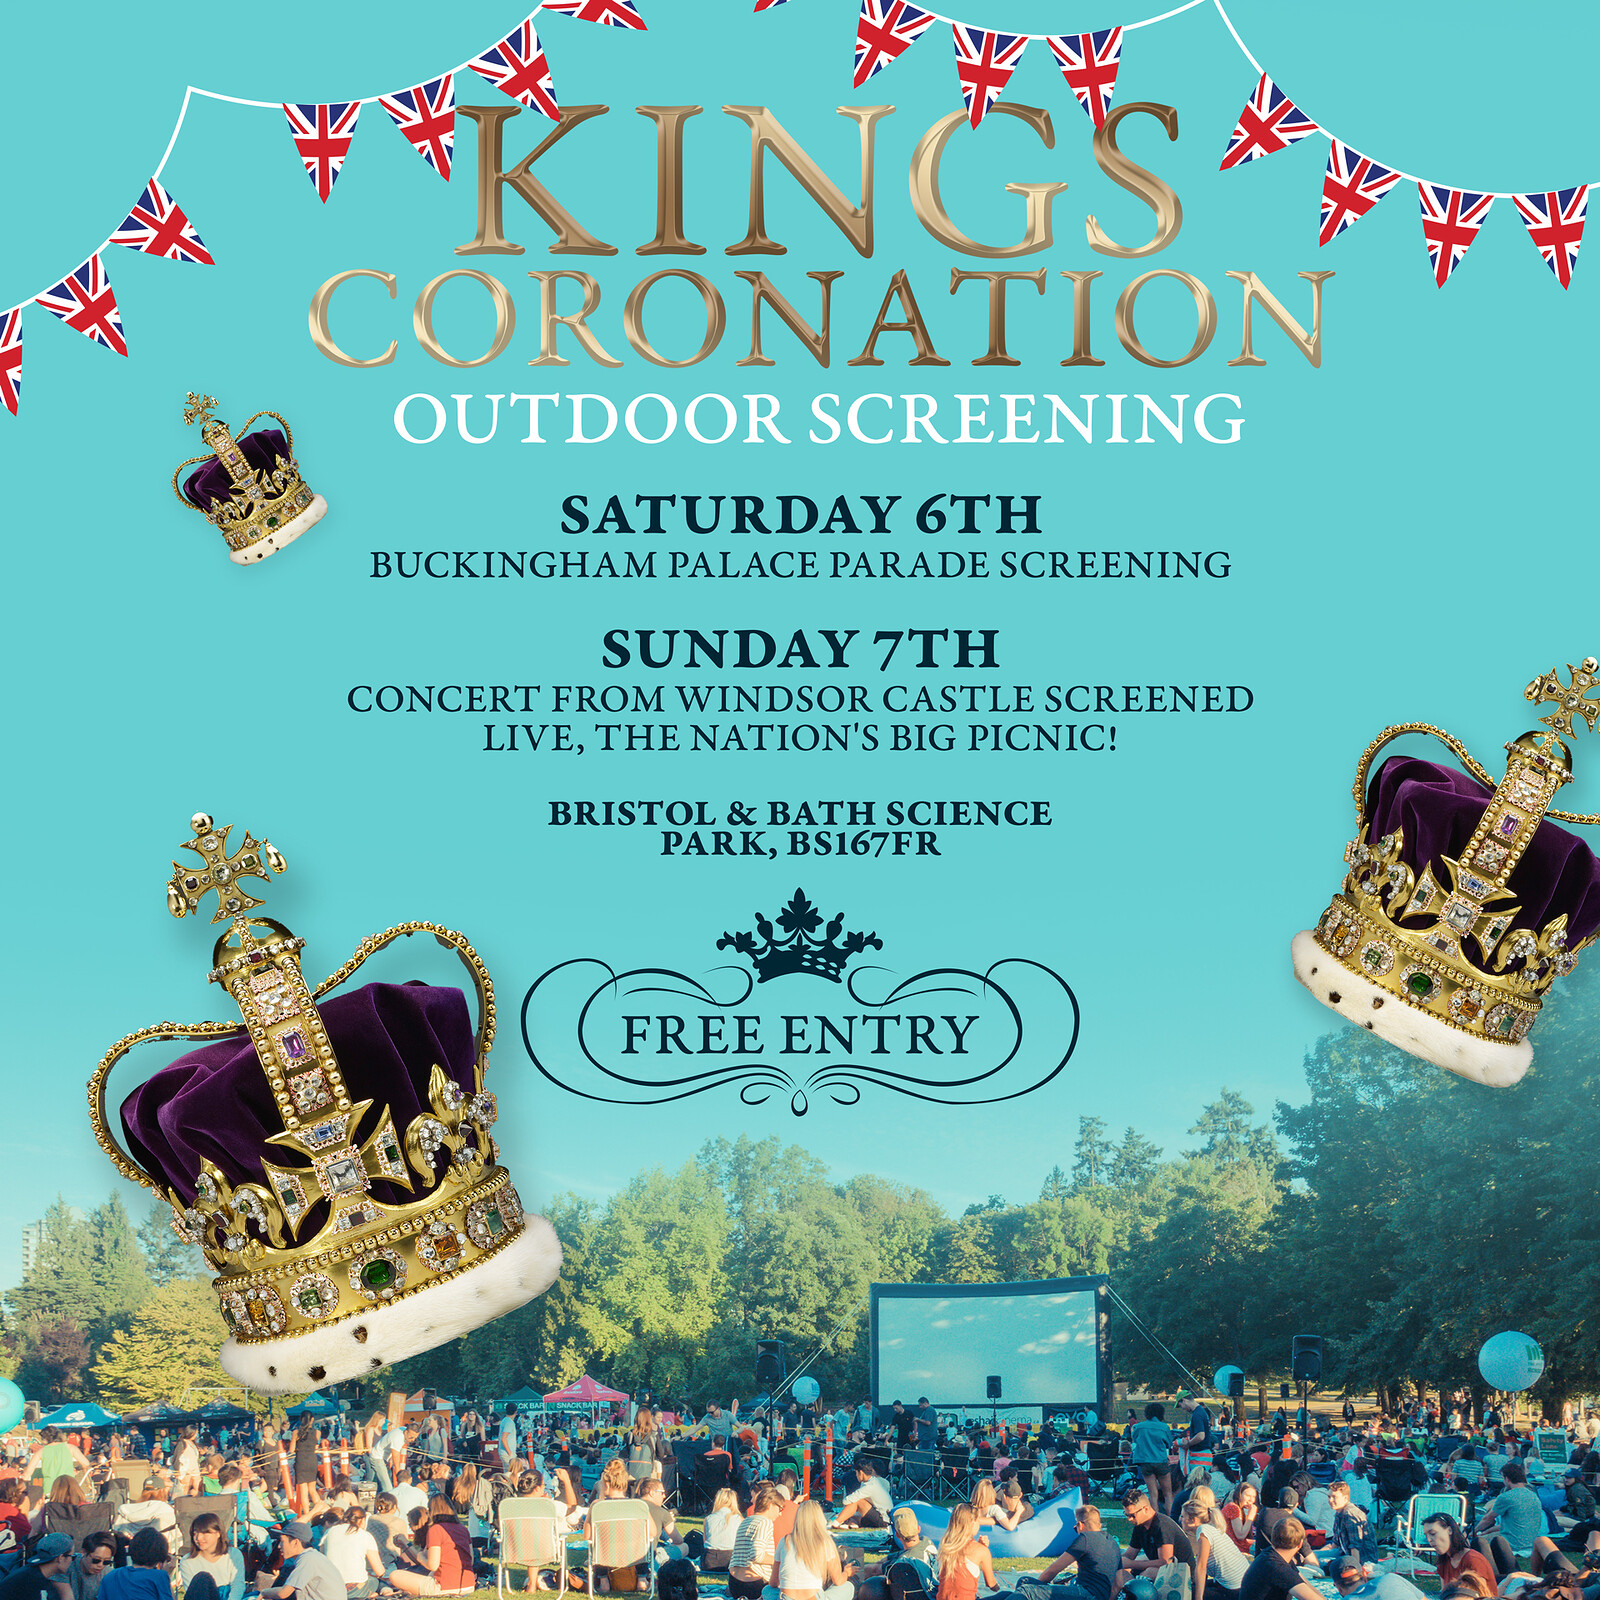 Kings Coronation Ceremony - On The Big Screen at Bristol & Bath Science Park, BS16 7FR